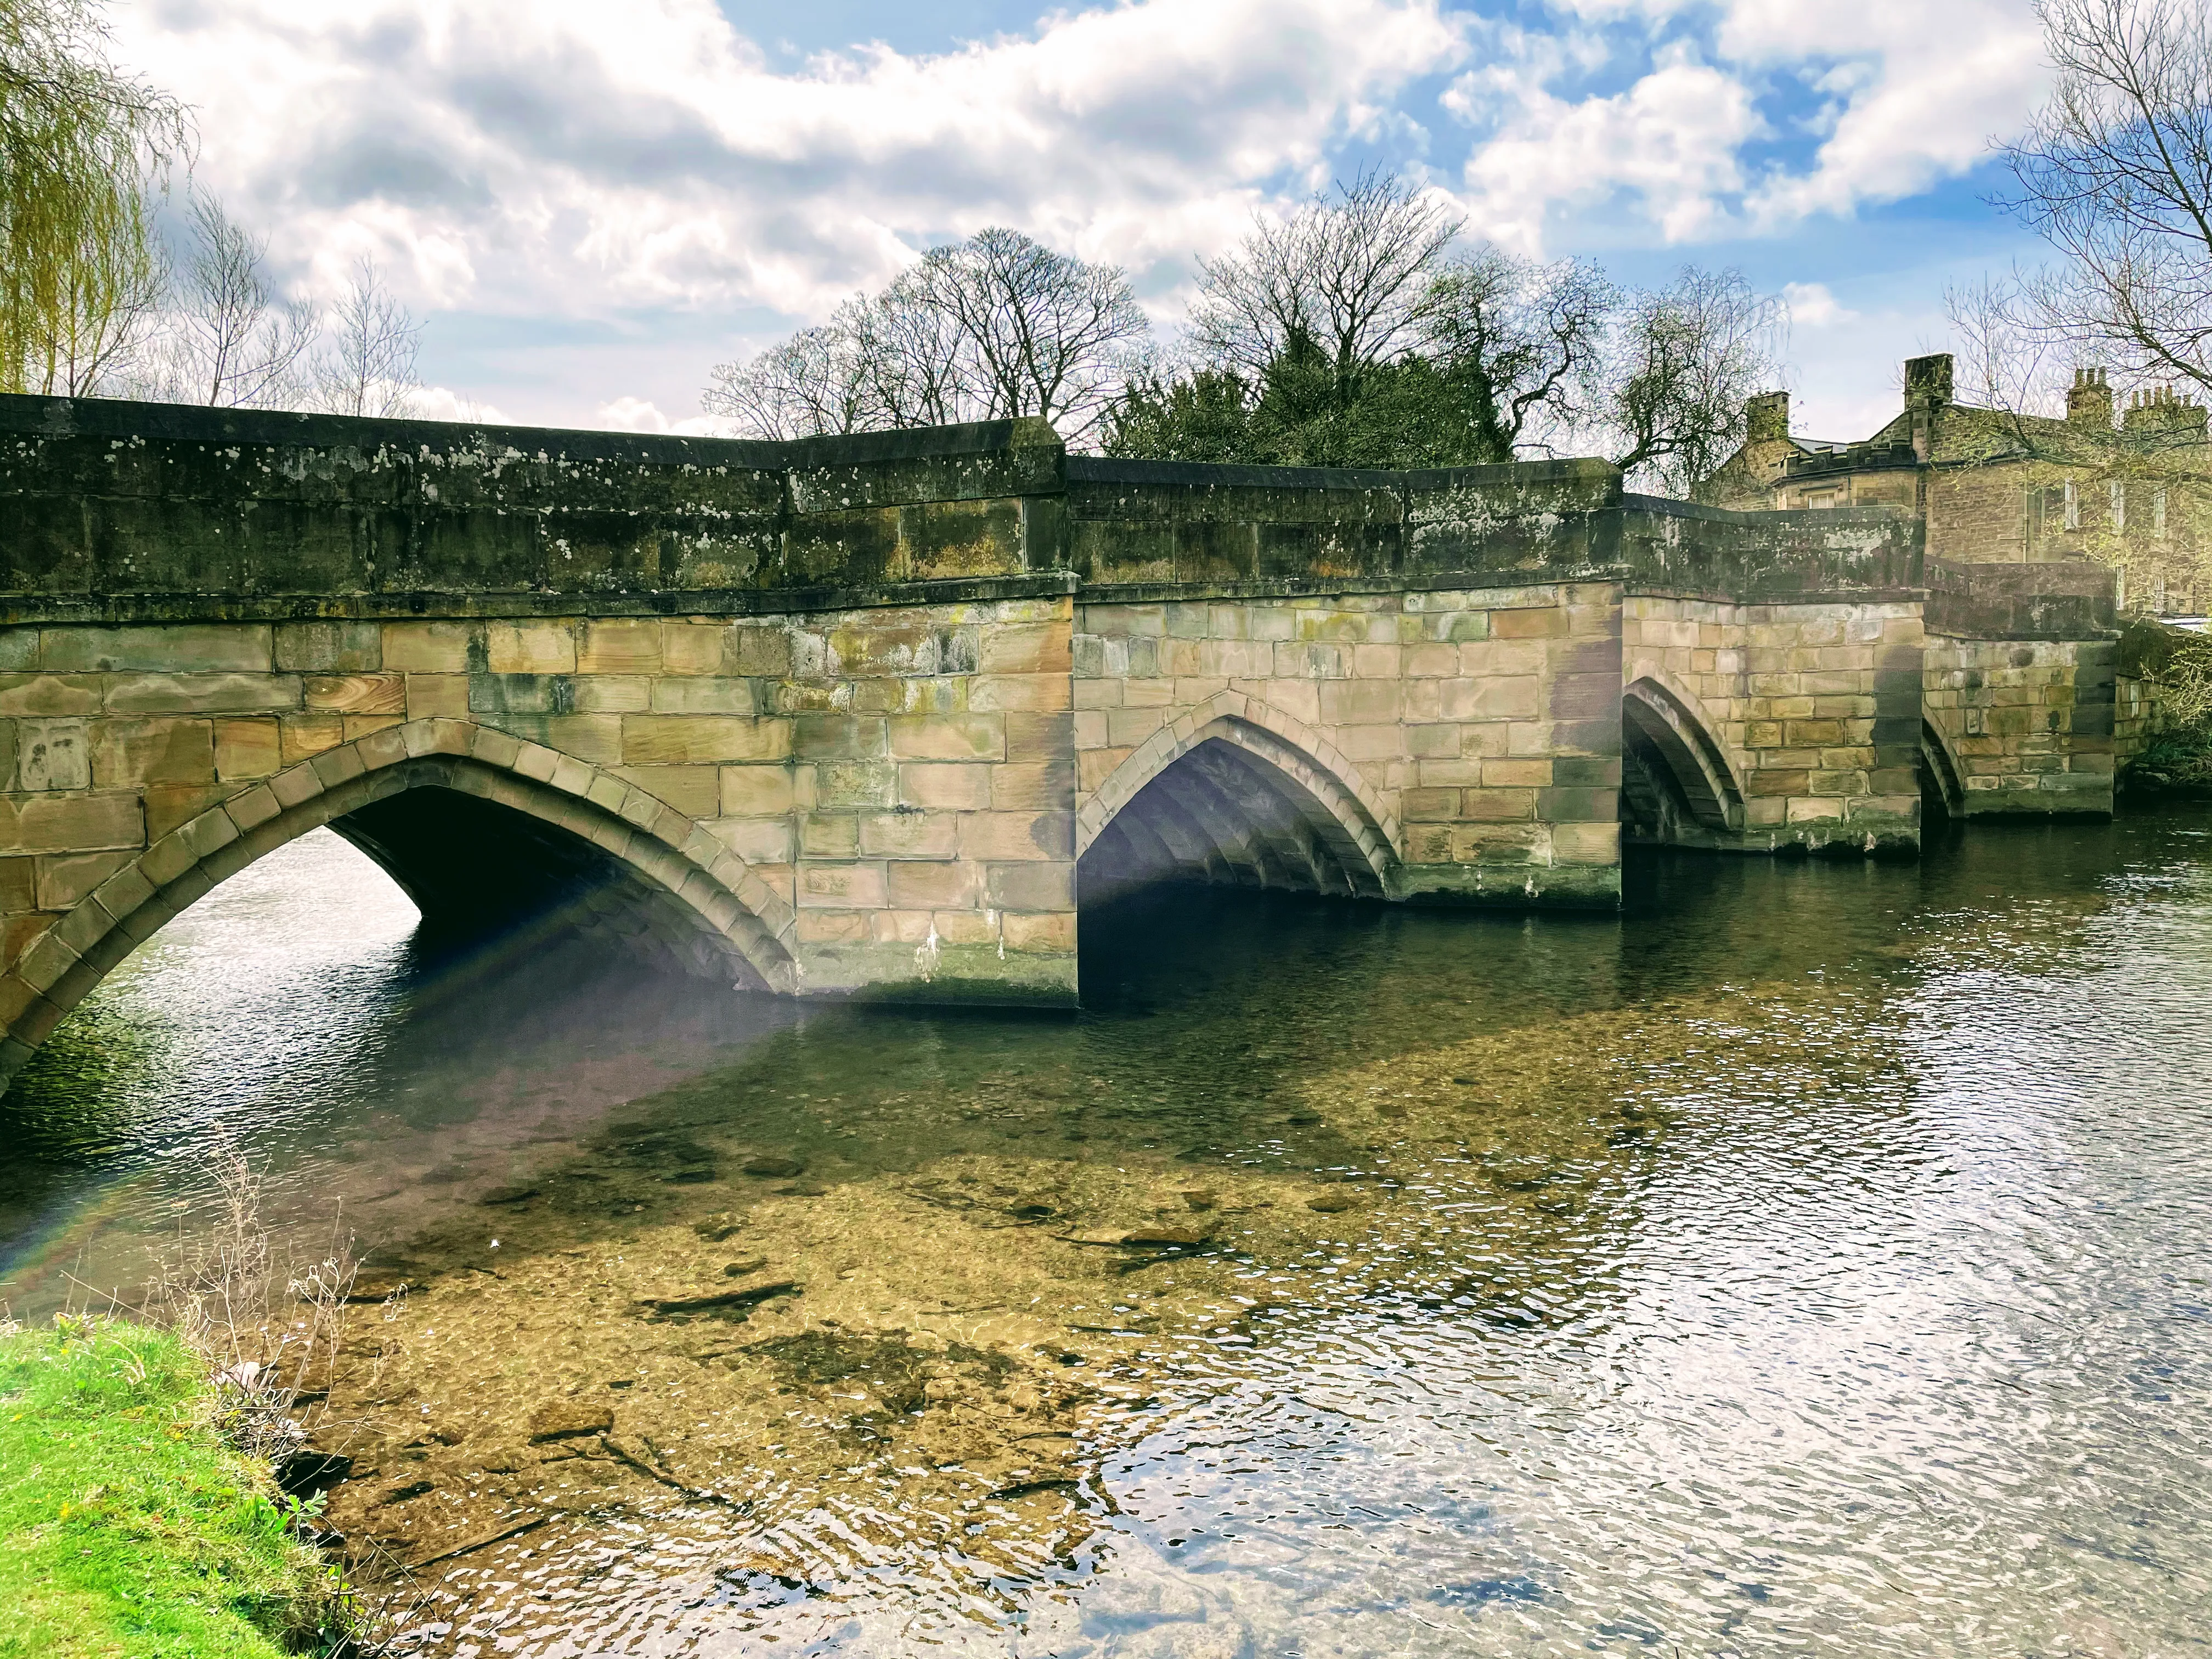 A Day Out In Derbyshire Has To Include Bakewell